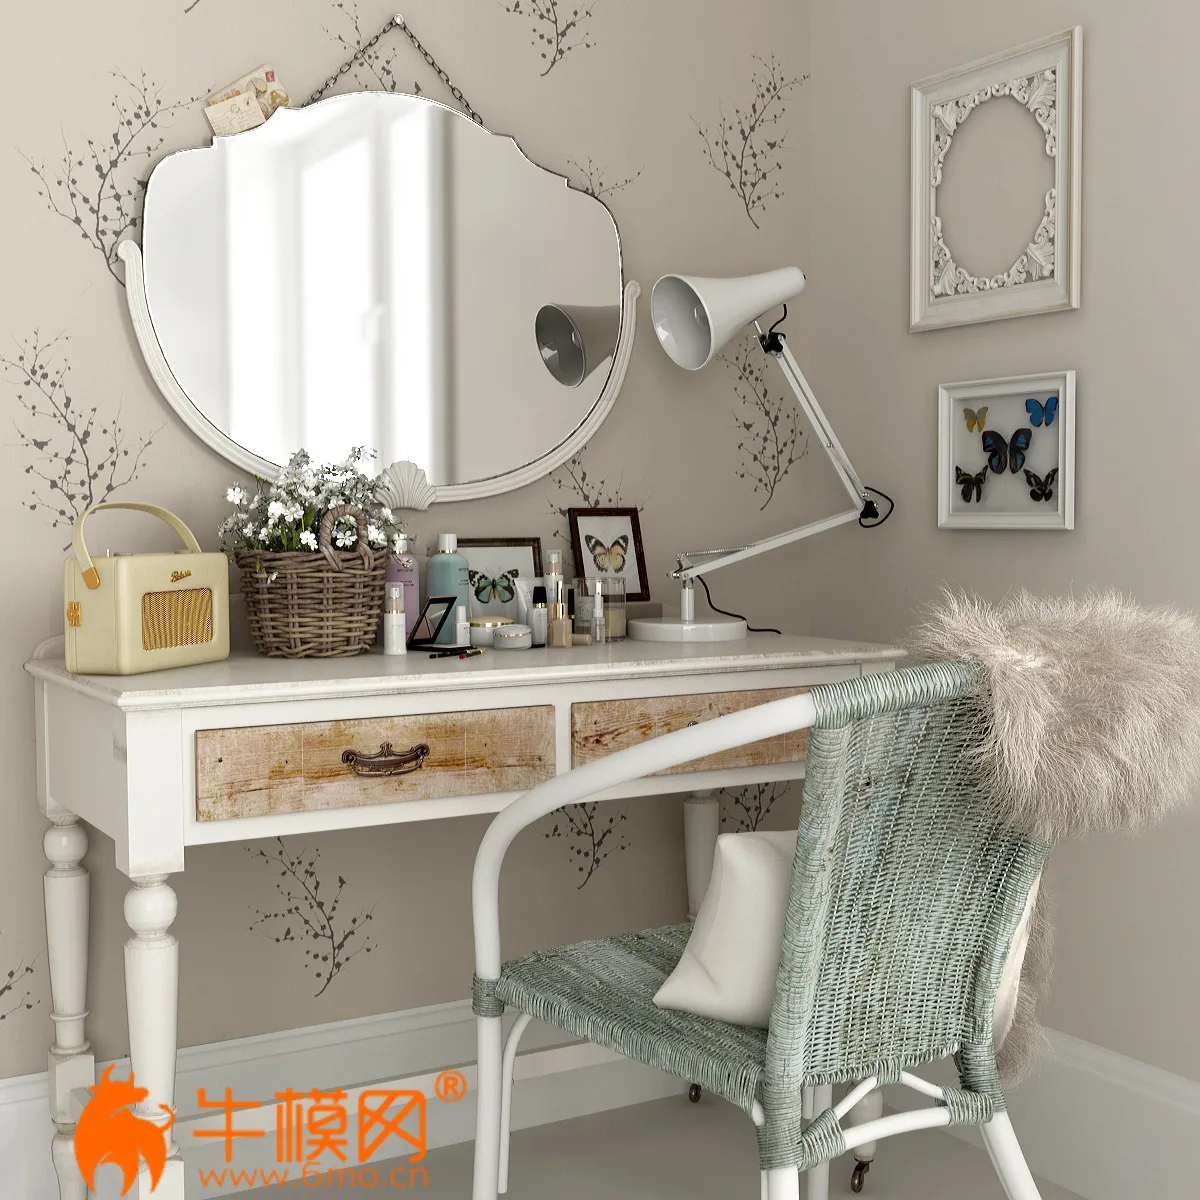 Dressing table (max 2014) – 6298